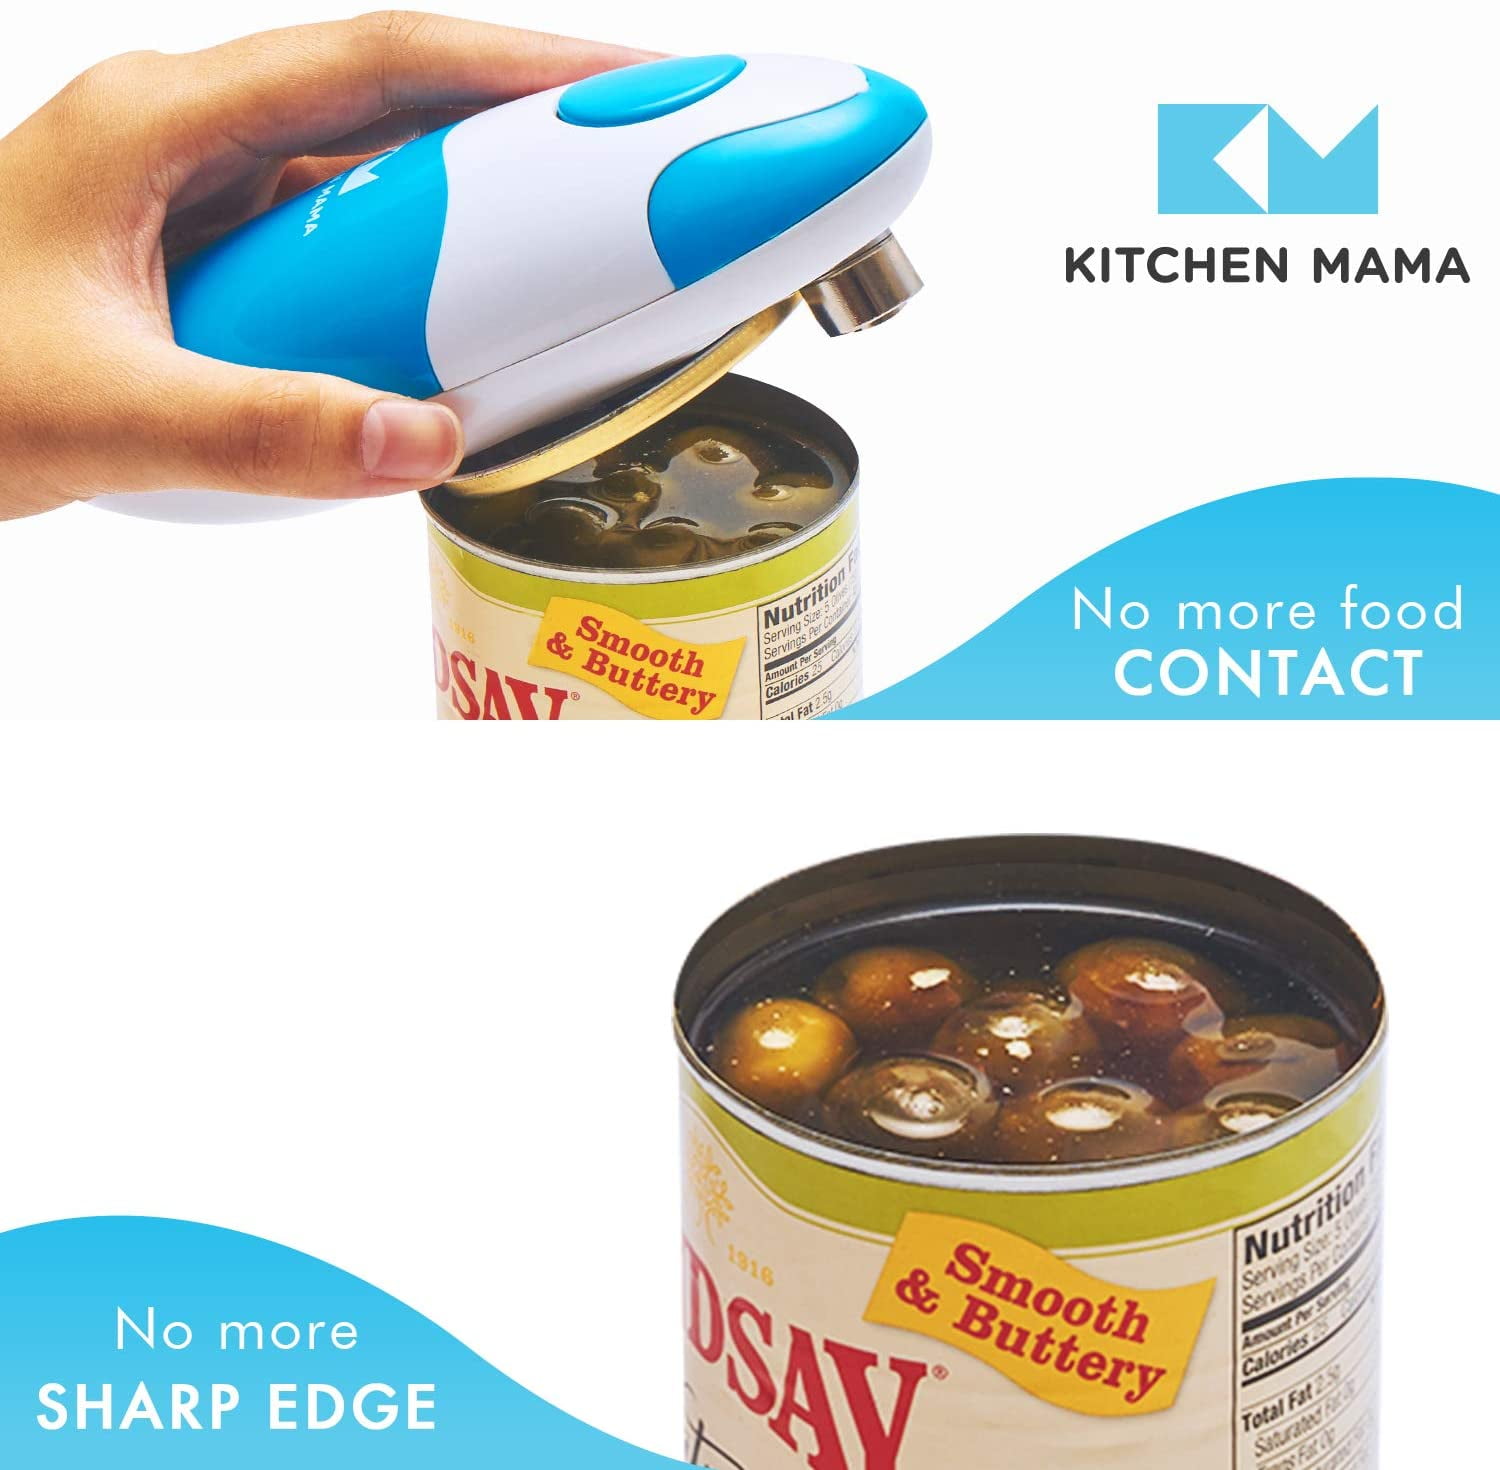 Kratax One Touch Electric Can Opener: Auto Stop When Finished, Ergonomic, Smooth Edge, Food-Safe, Battery Operated Can Opener Blue